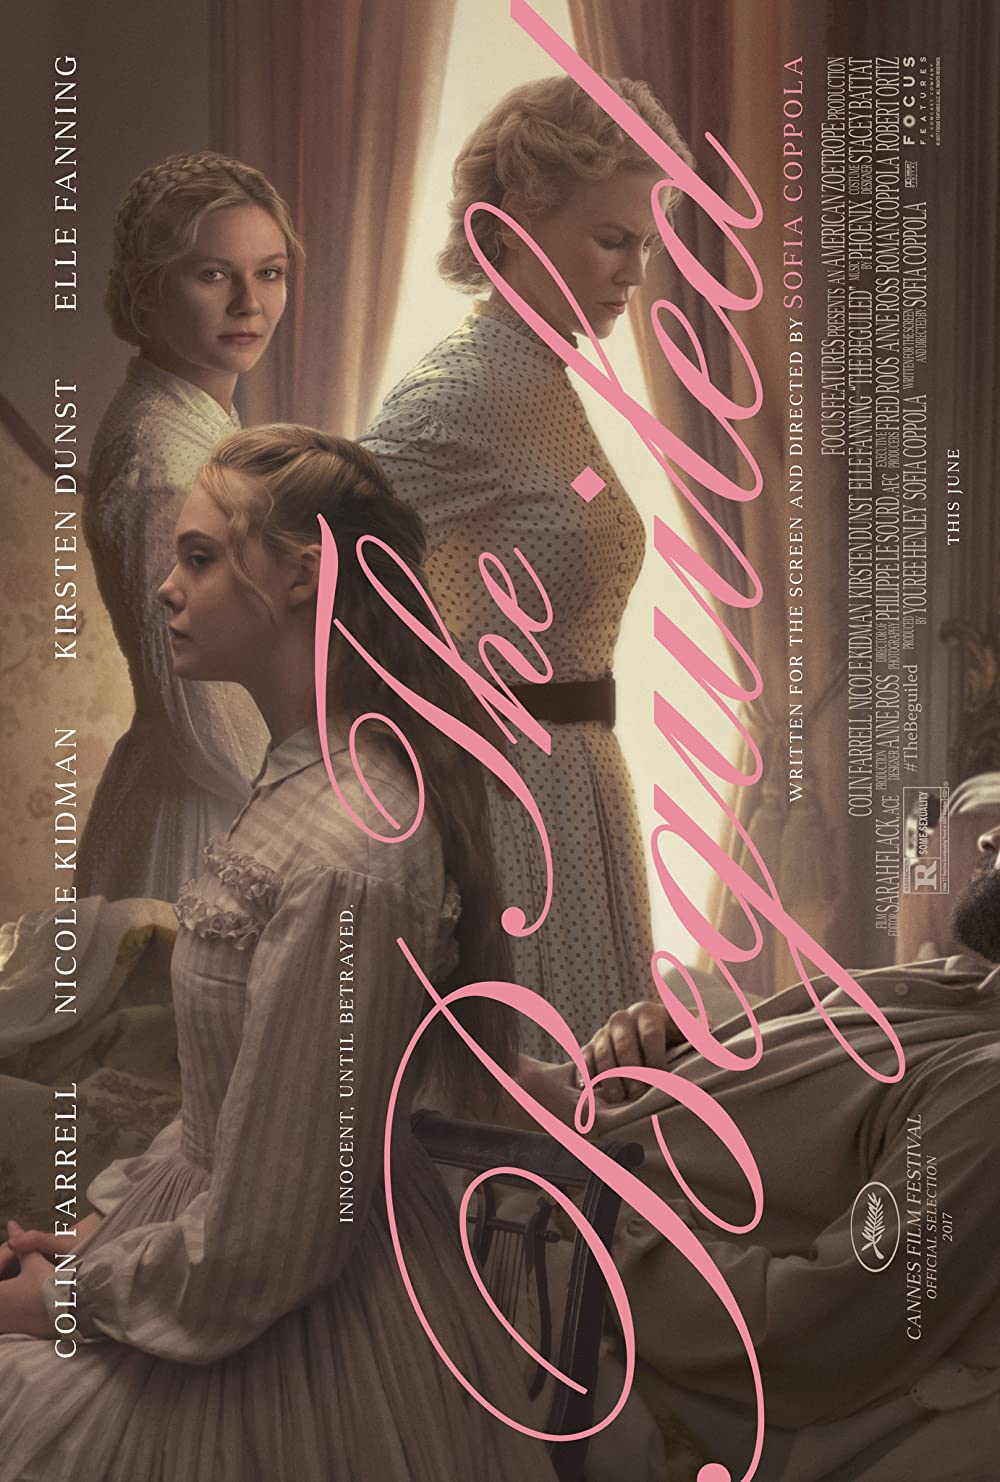 The Beguiled (2017) ★★★☆☆